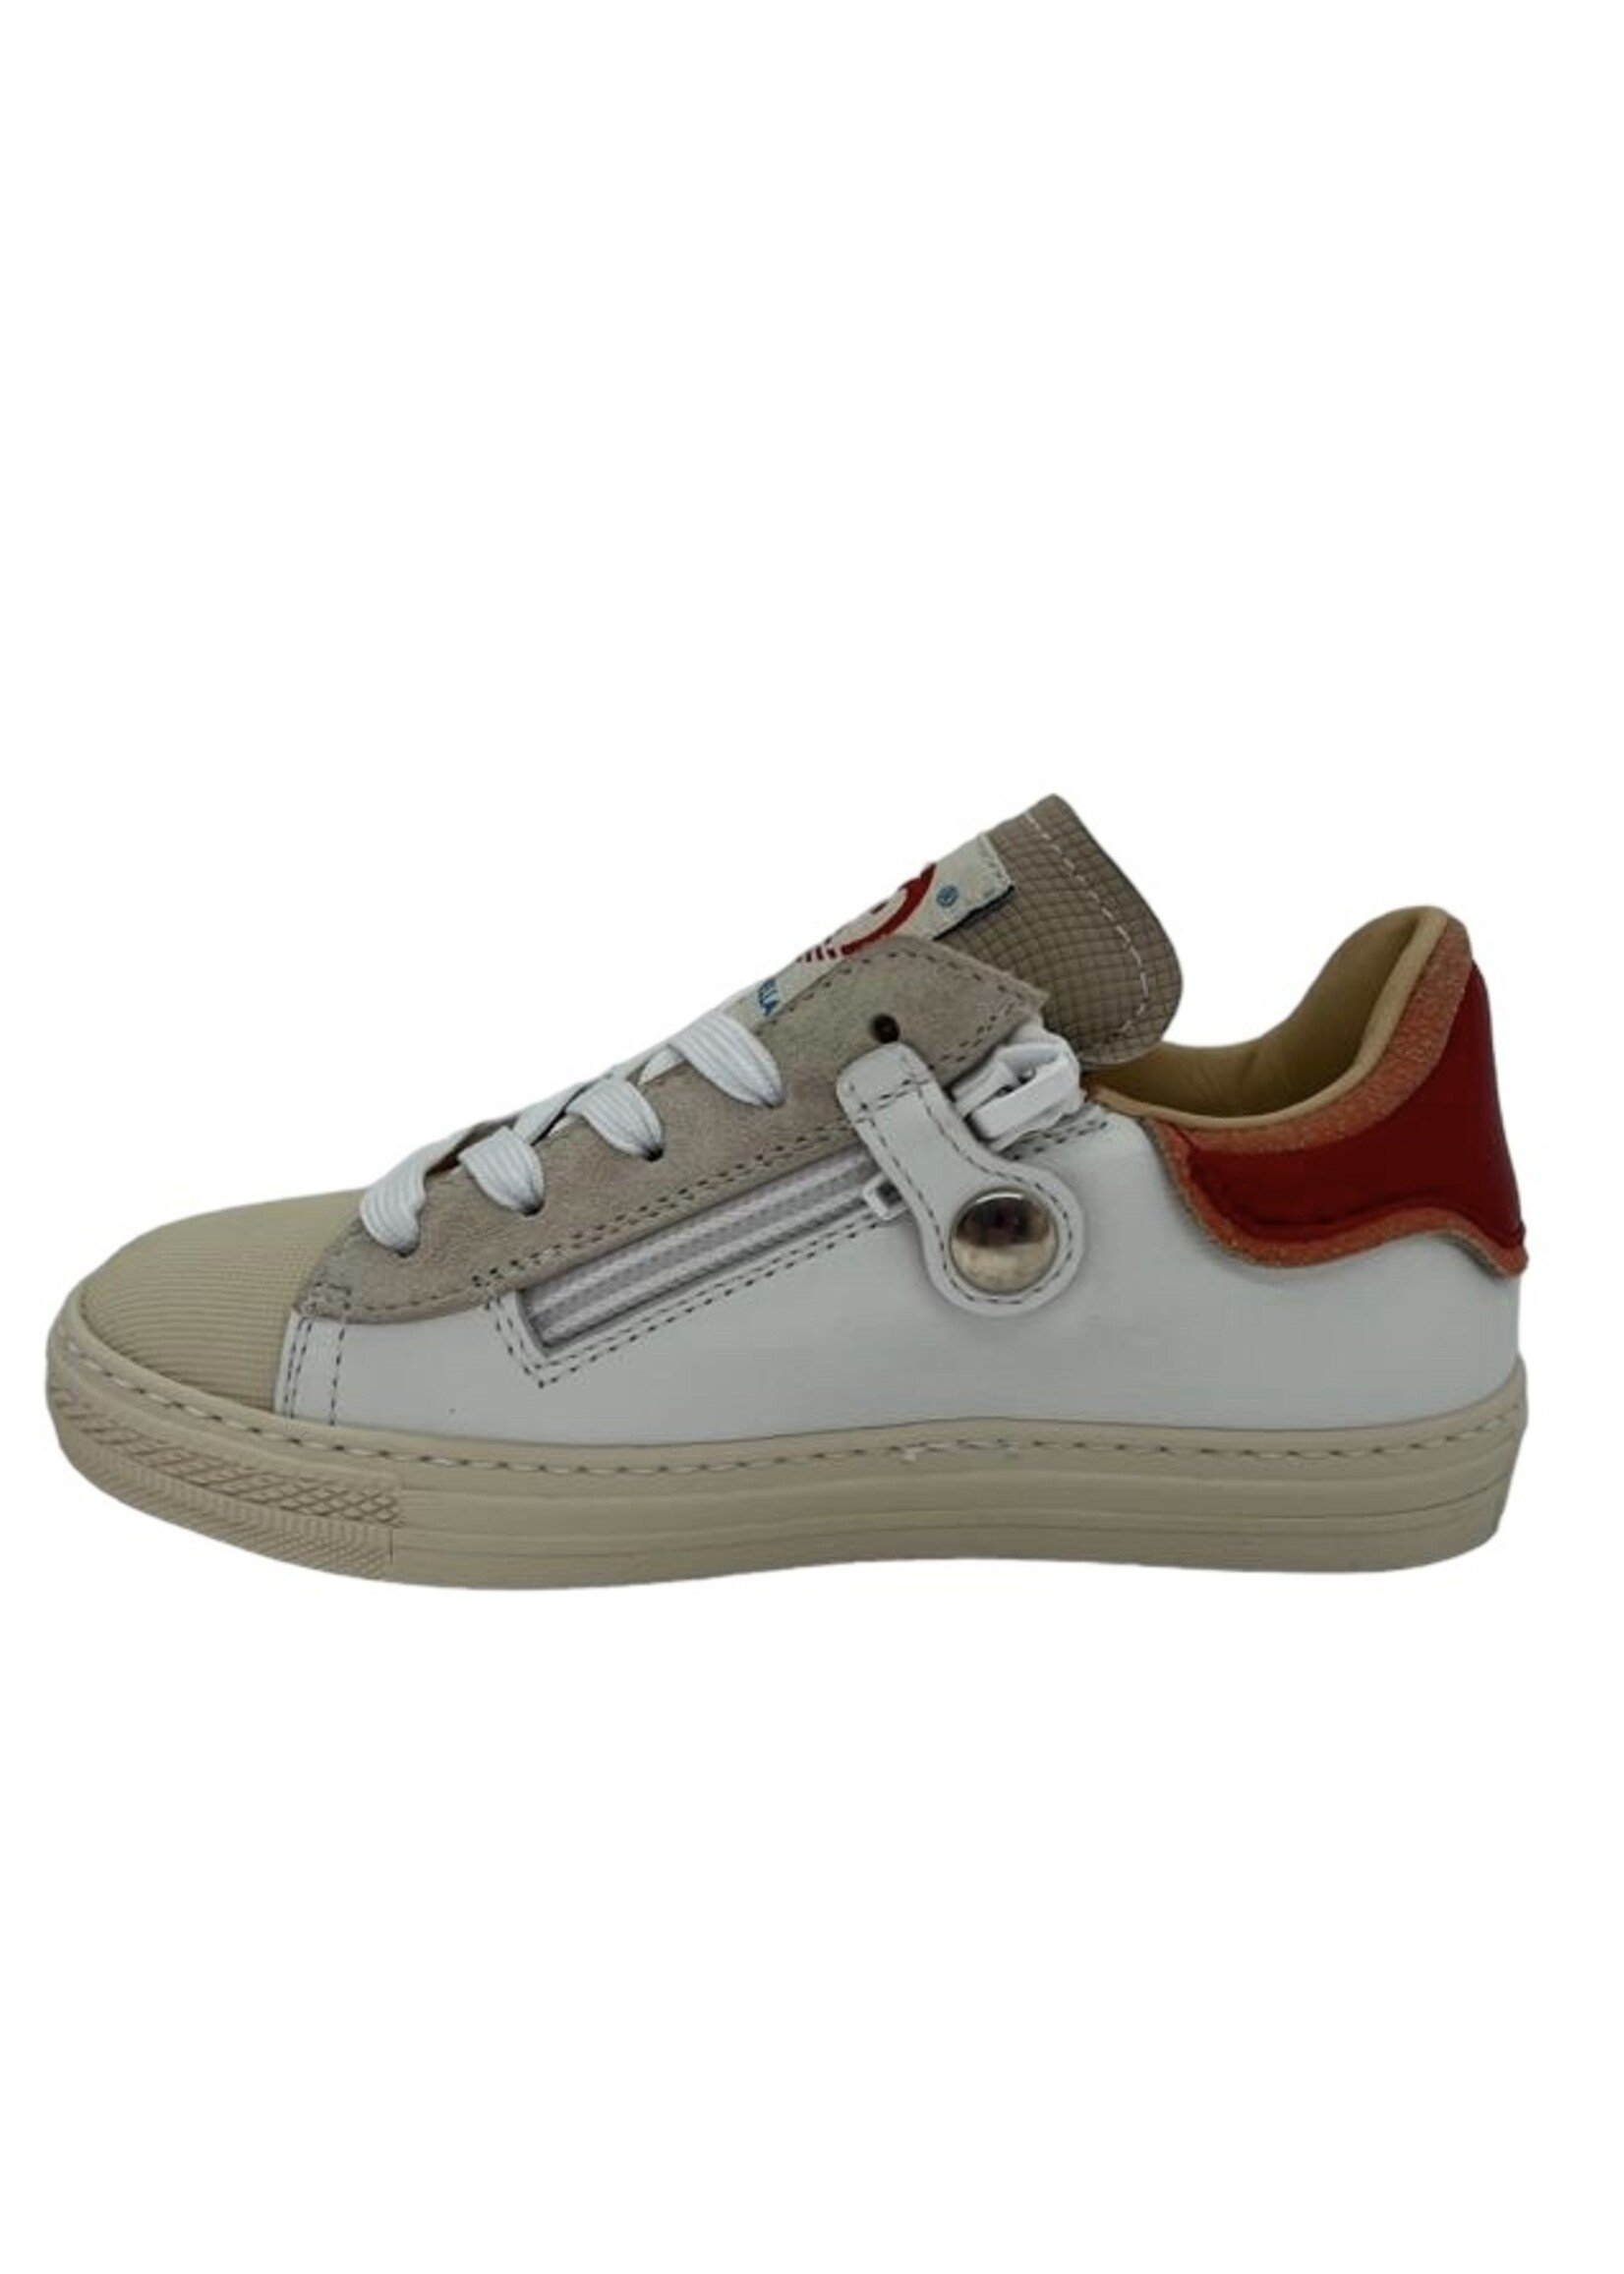 Rondinella 12068 sneaker wit rood